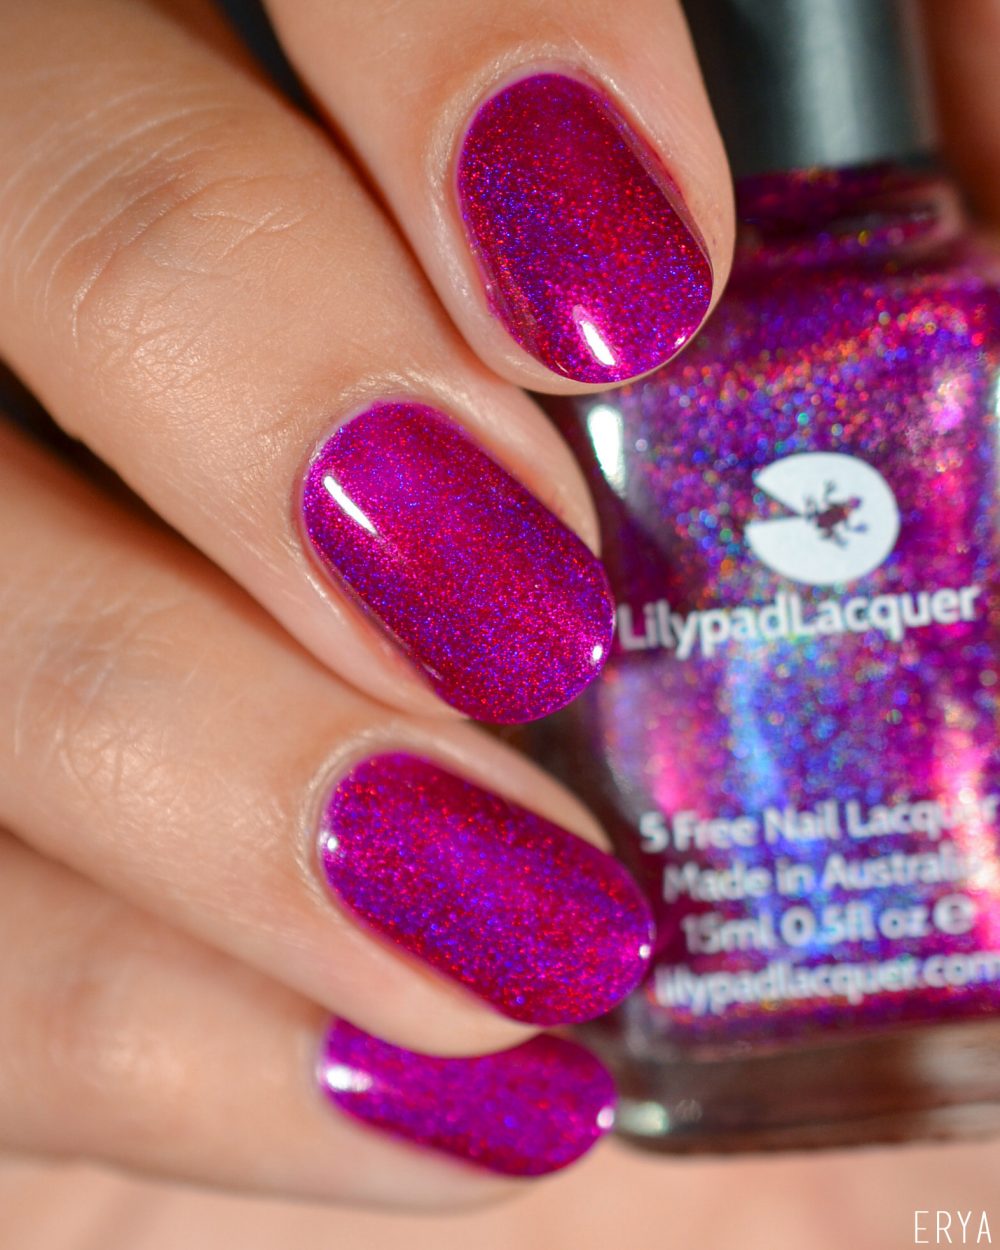 lilypad_lacquer-beet_this-6